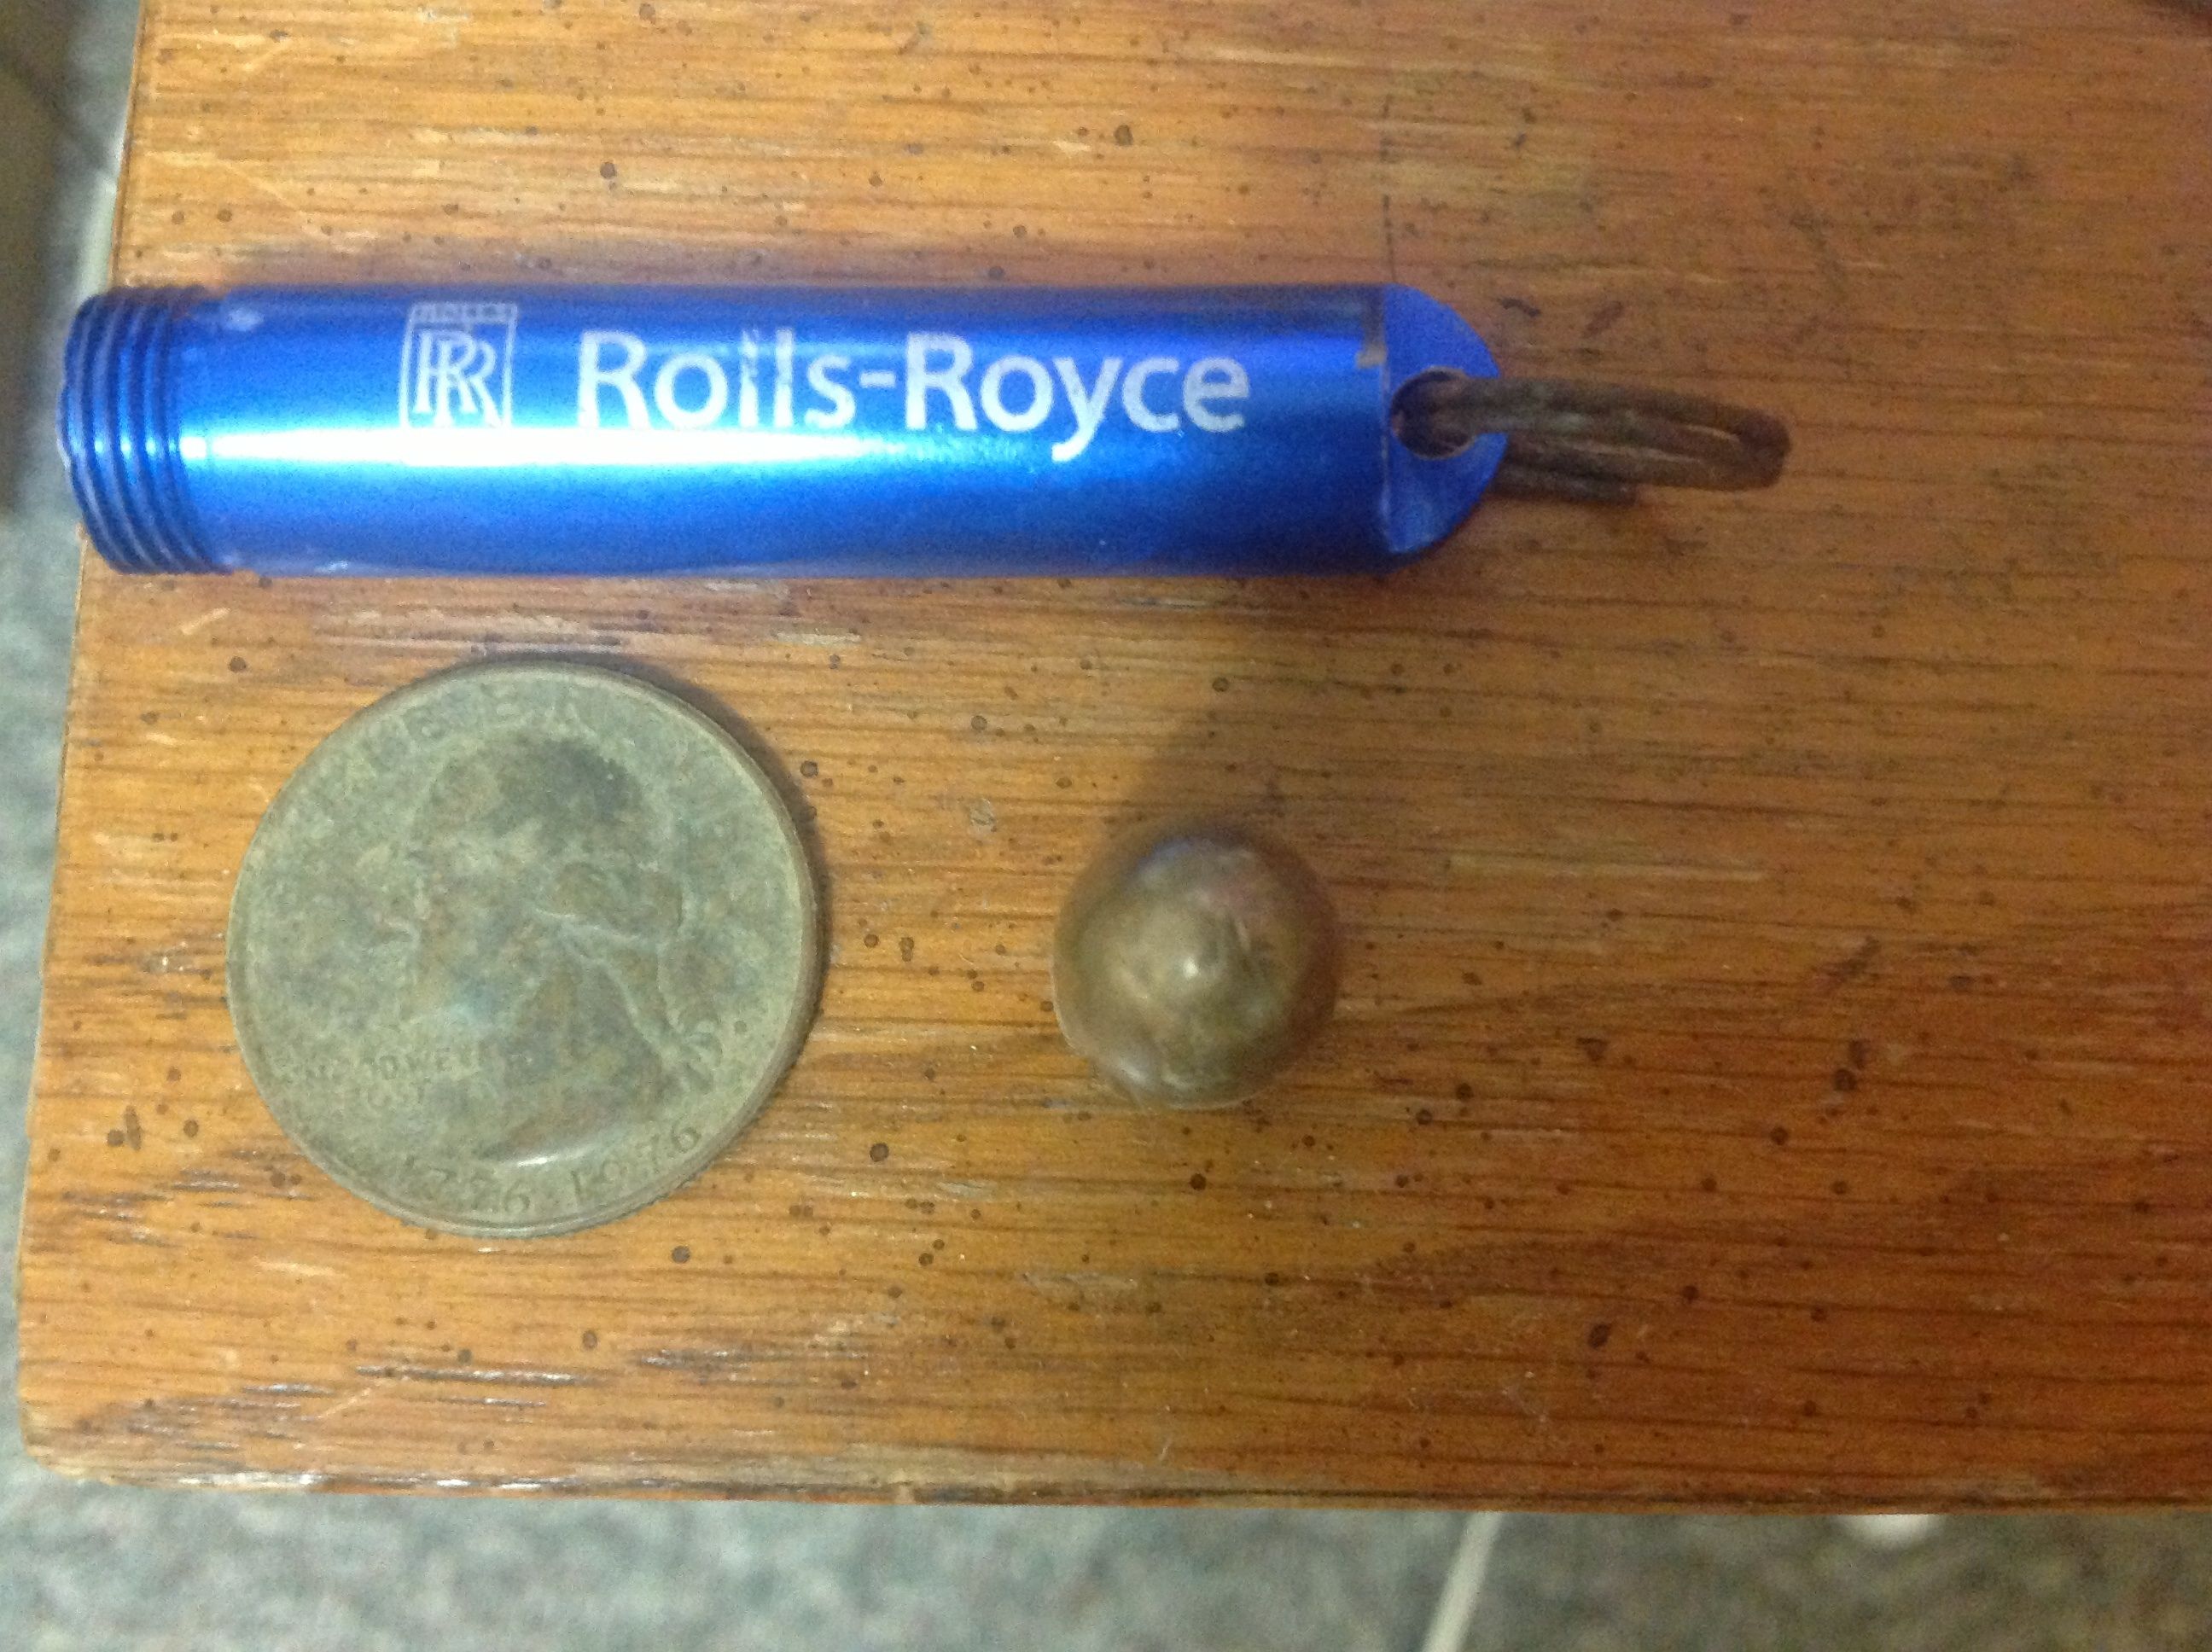 A Bicentennial quarter, 45 ACP projectile and a rolls Royce thingy